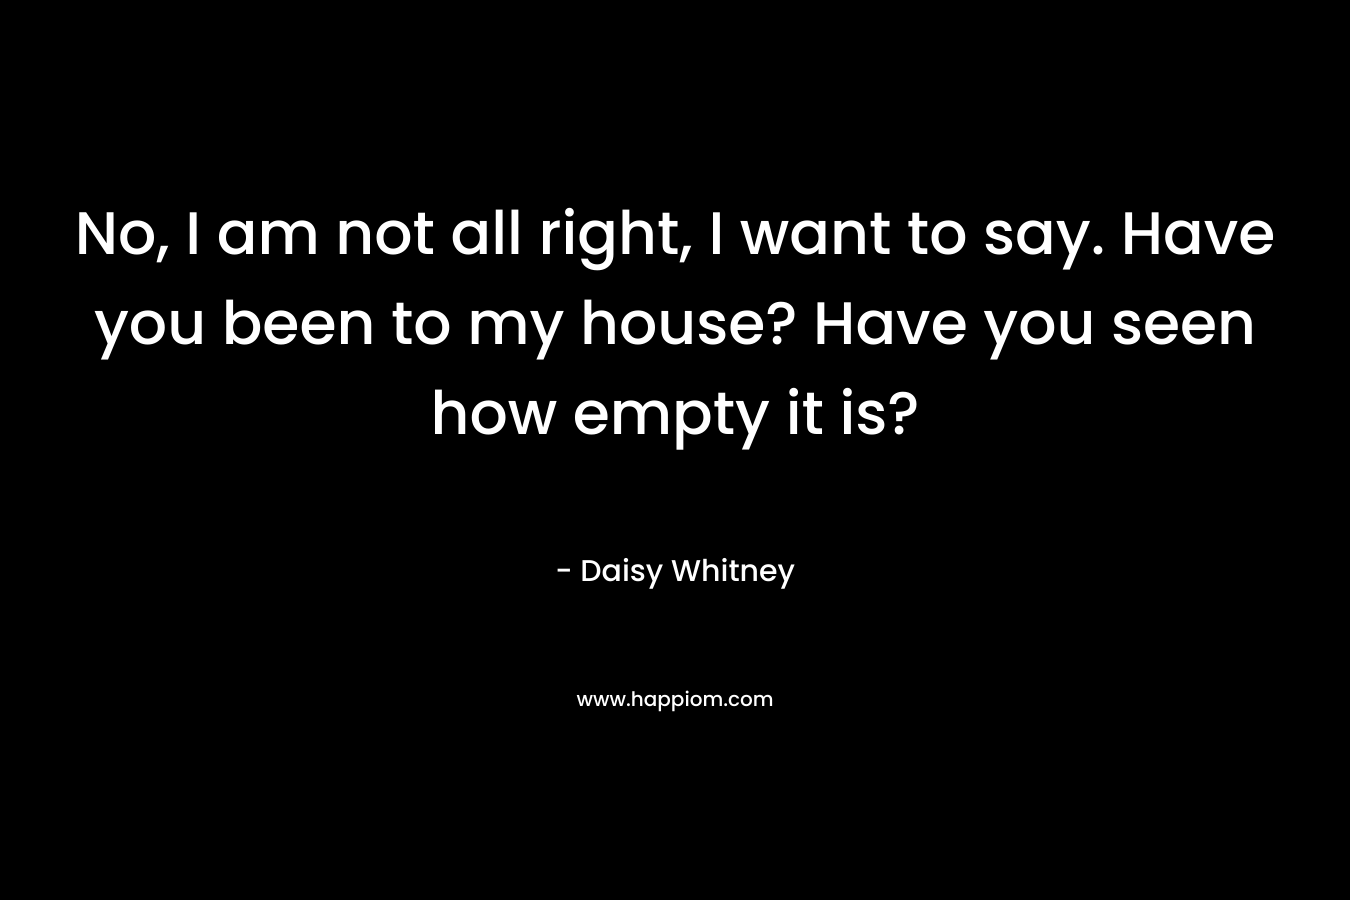 No, I am not all right, I want to say. Have you been to my house? Have you seen how empty it is? – Daisy Whitney